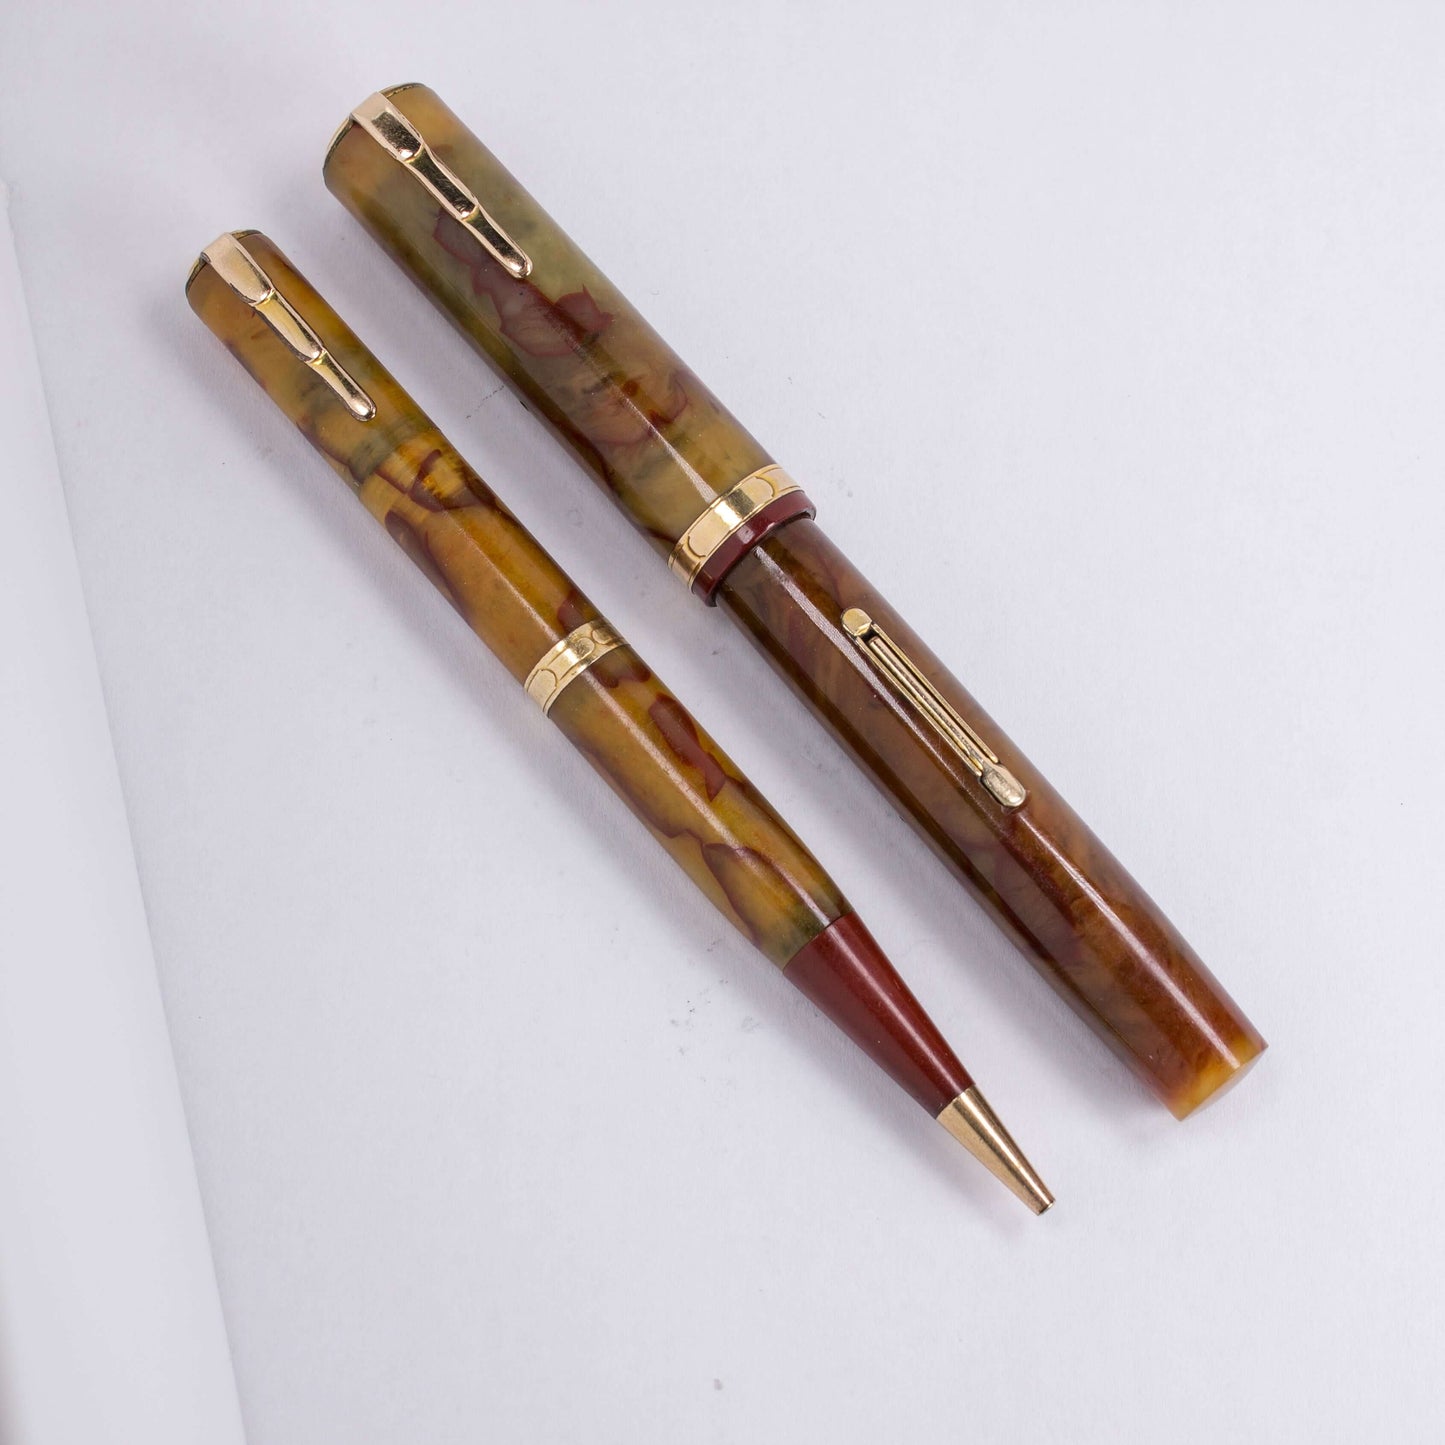 ${titleType: Waterman's Lady PatriciaManufacture Year: 1930'sLength: 4 5/16Filling System: Lever filler, restored with new sacColor/Pattern: Onyx, Cream with red veinsNib Type/Condition and remarks: Fine Accountant, Firm, Waterman's IdealCondition: Excell